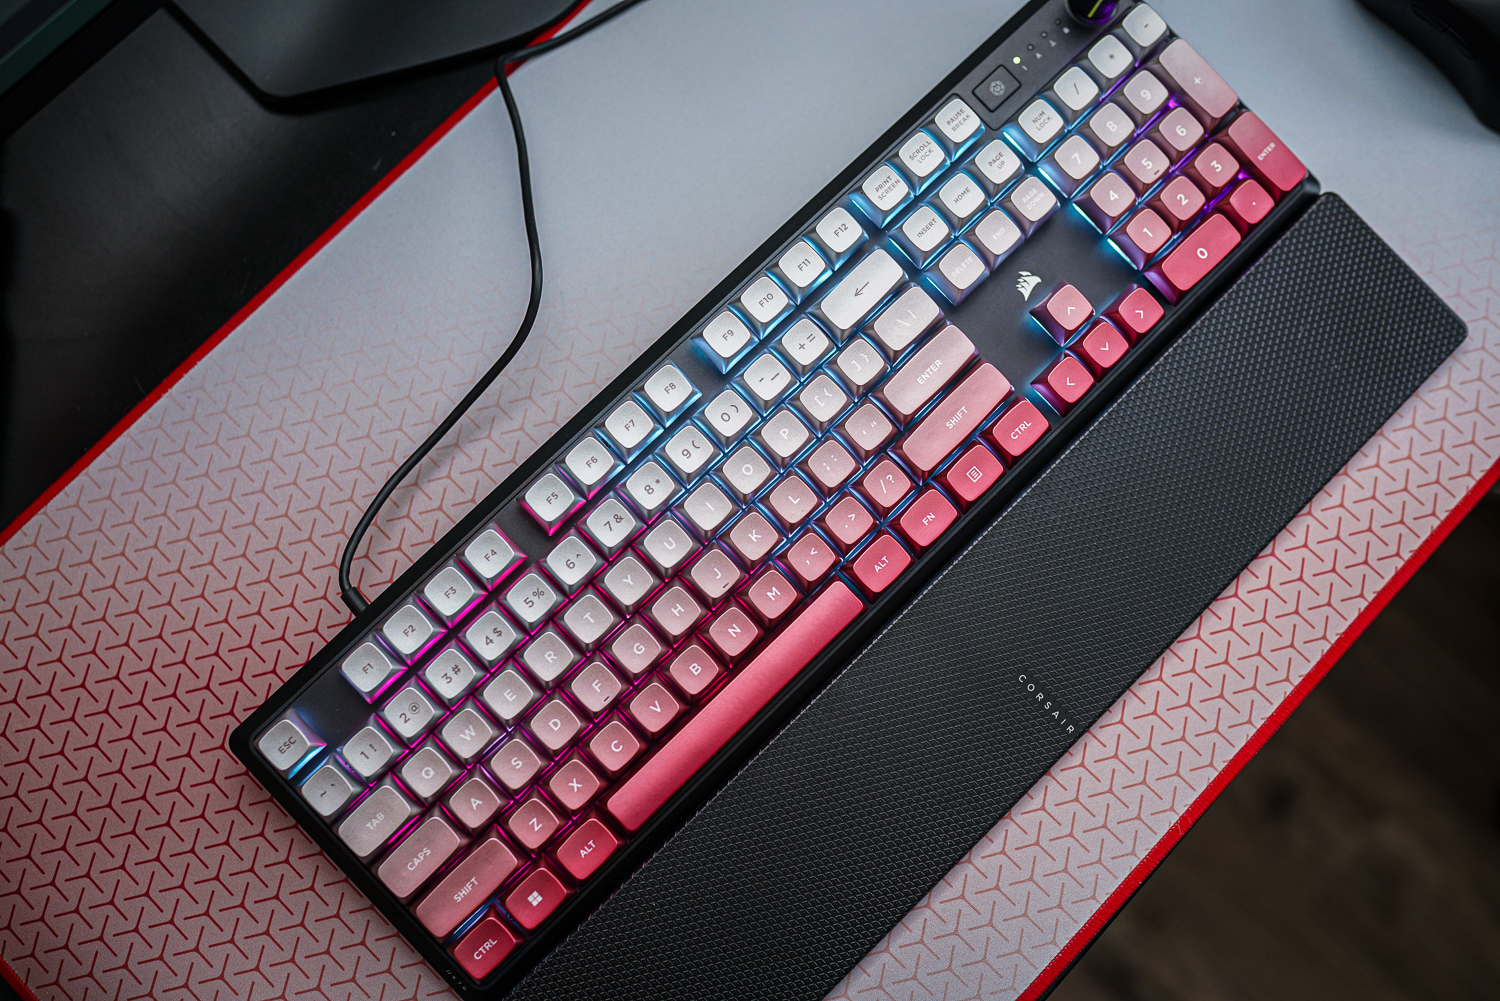 The Corsair Steel Crimson keycaps installed on a K70 Core keyboard.